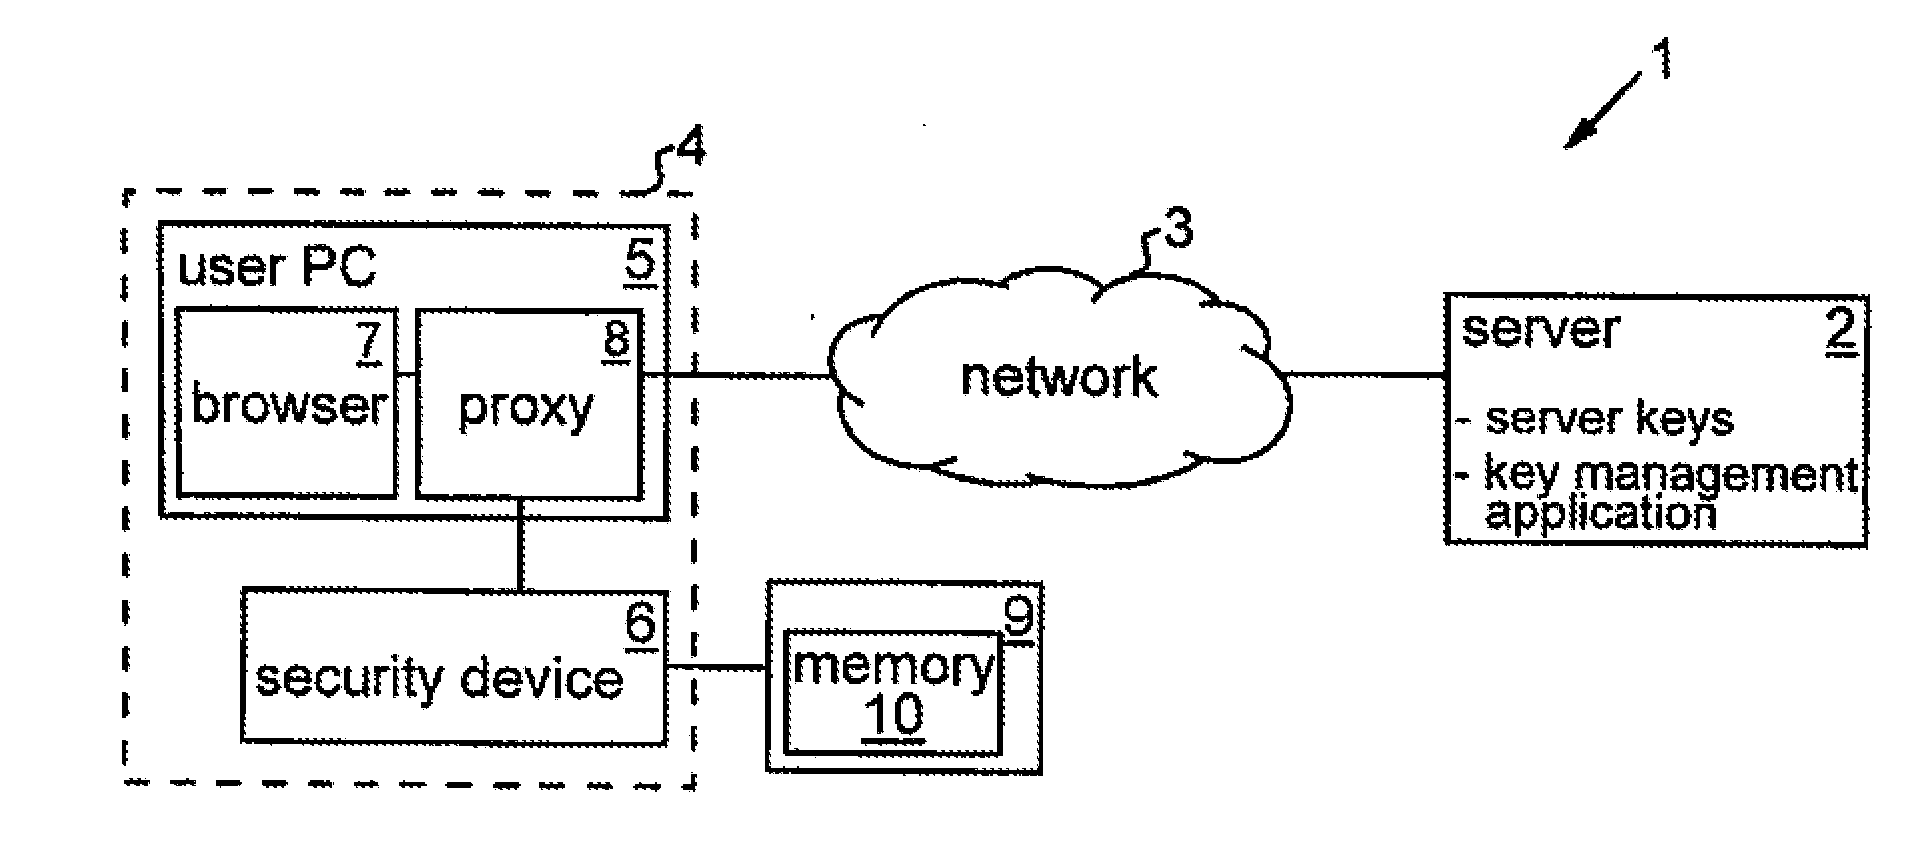 Management of secret data items used for server authentication